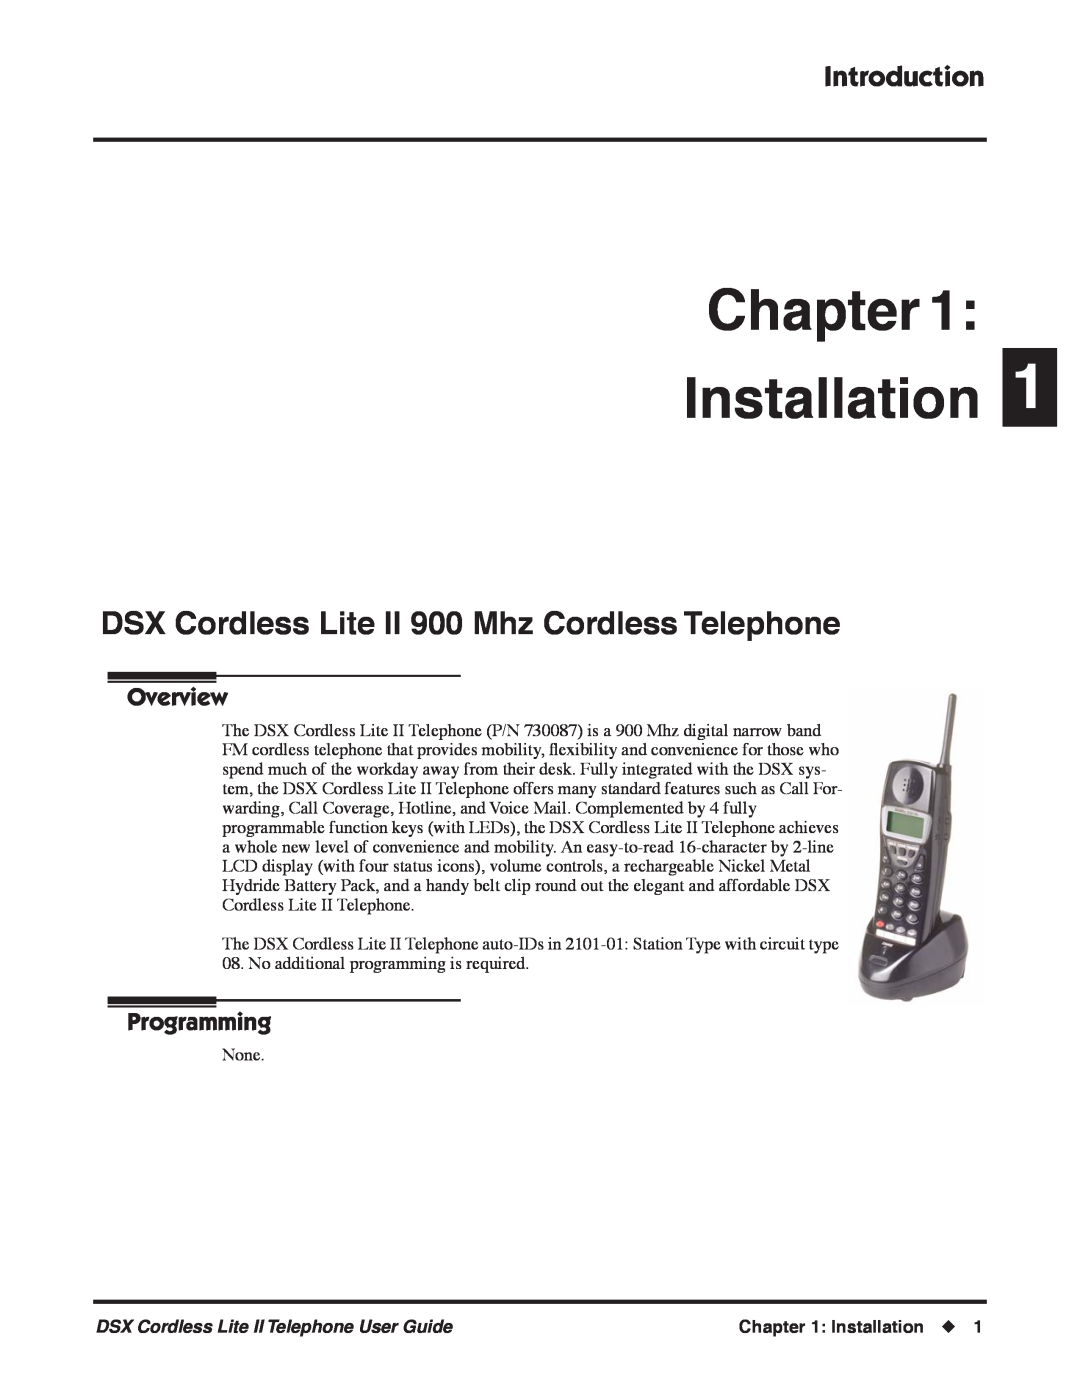 NEC 1093092 Chapter Installation, DSX Cordless Lite II 900 Mhz Cordless Telephone, Introduction, Overview, Programming 